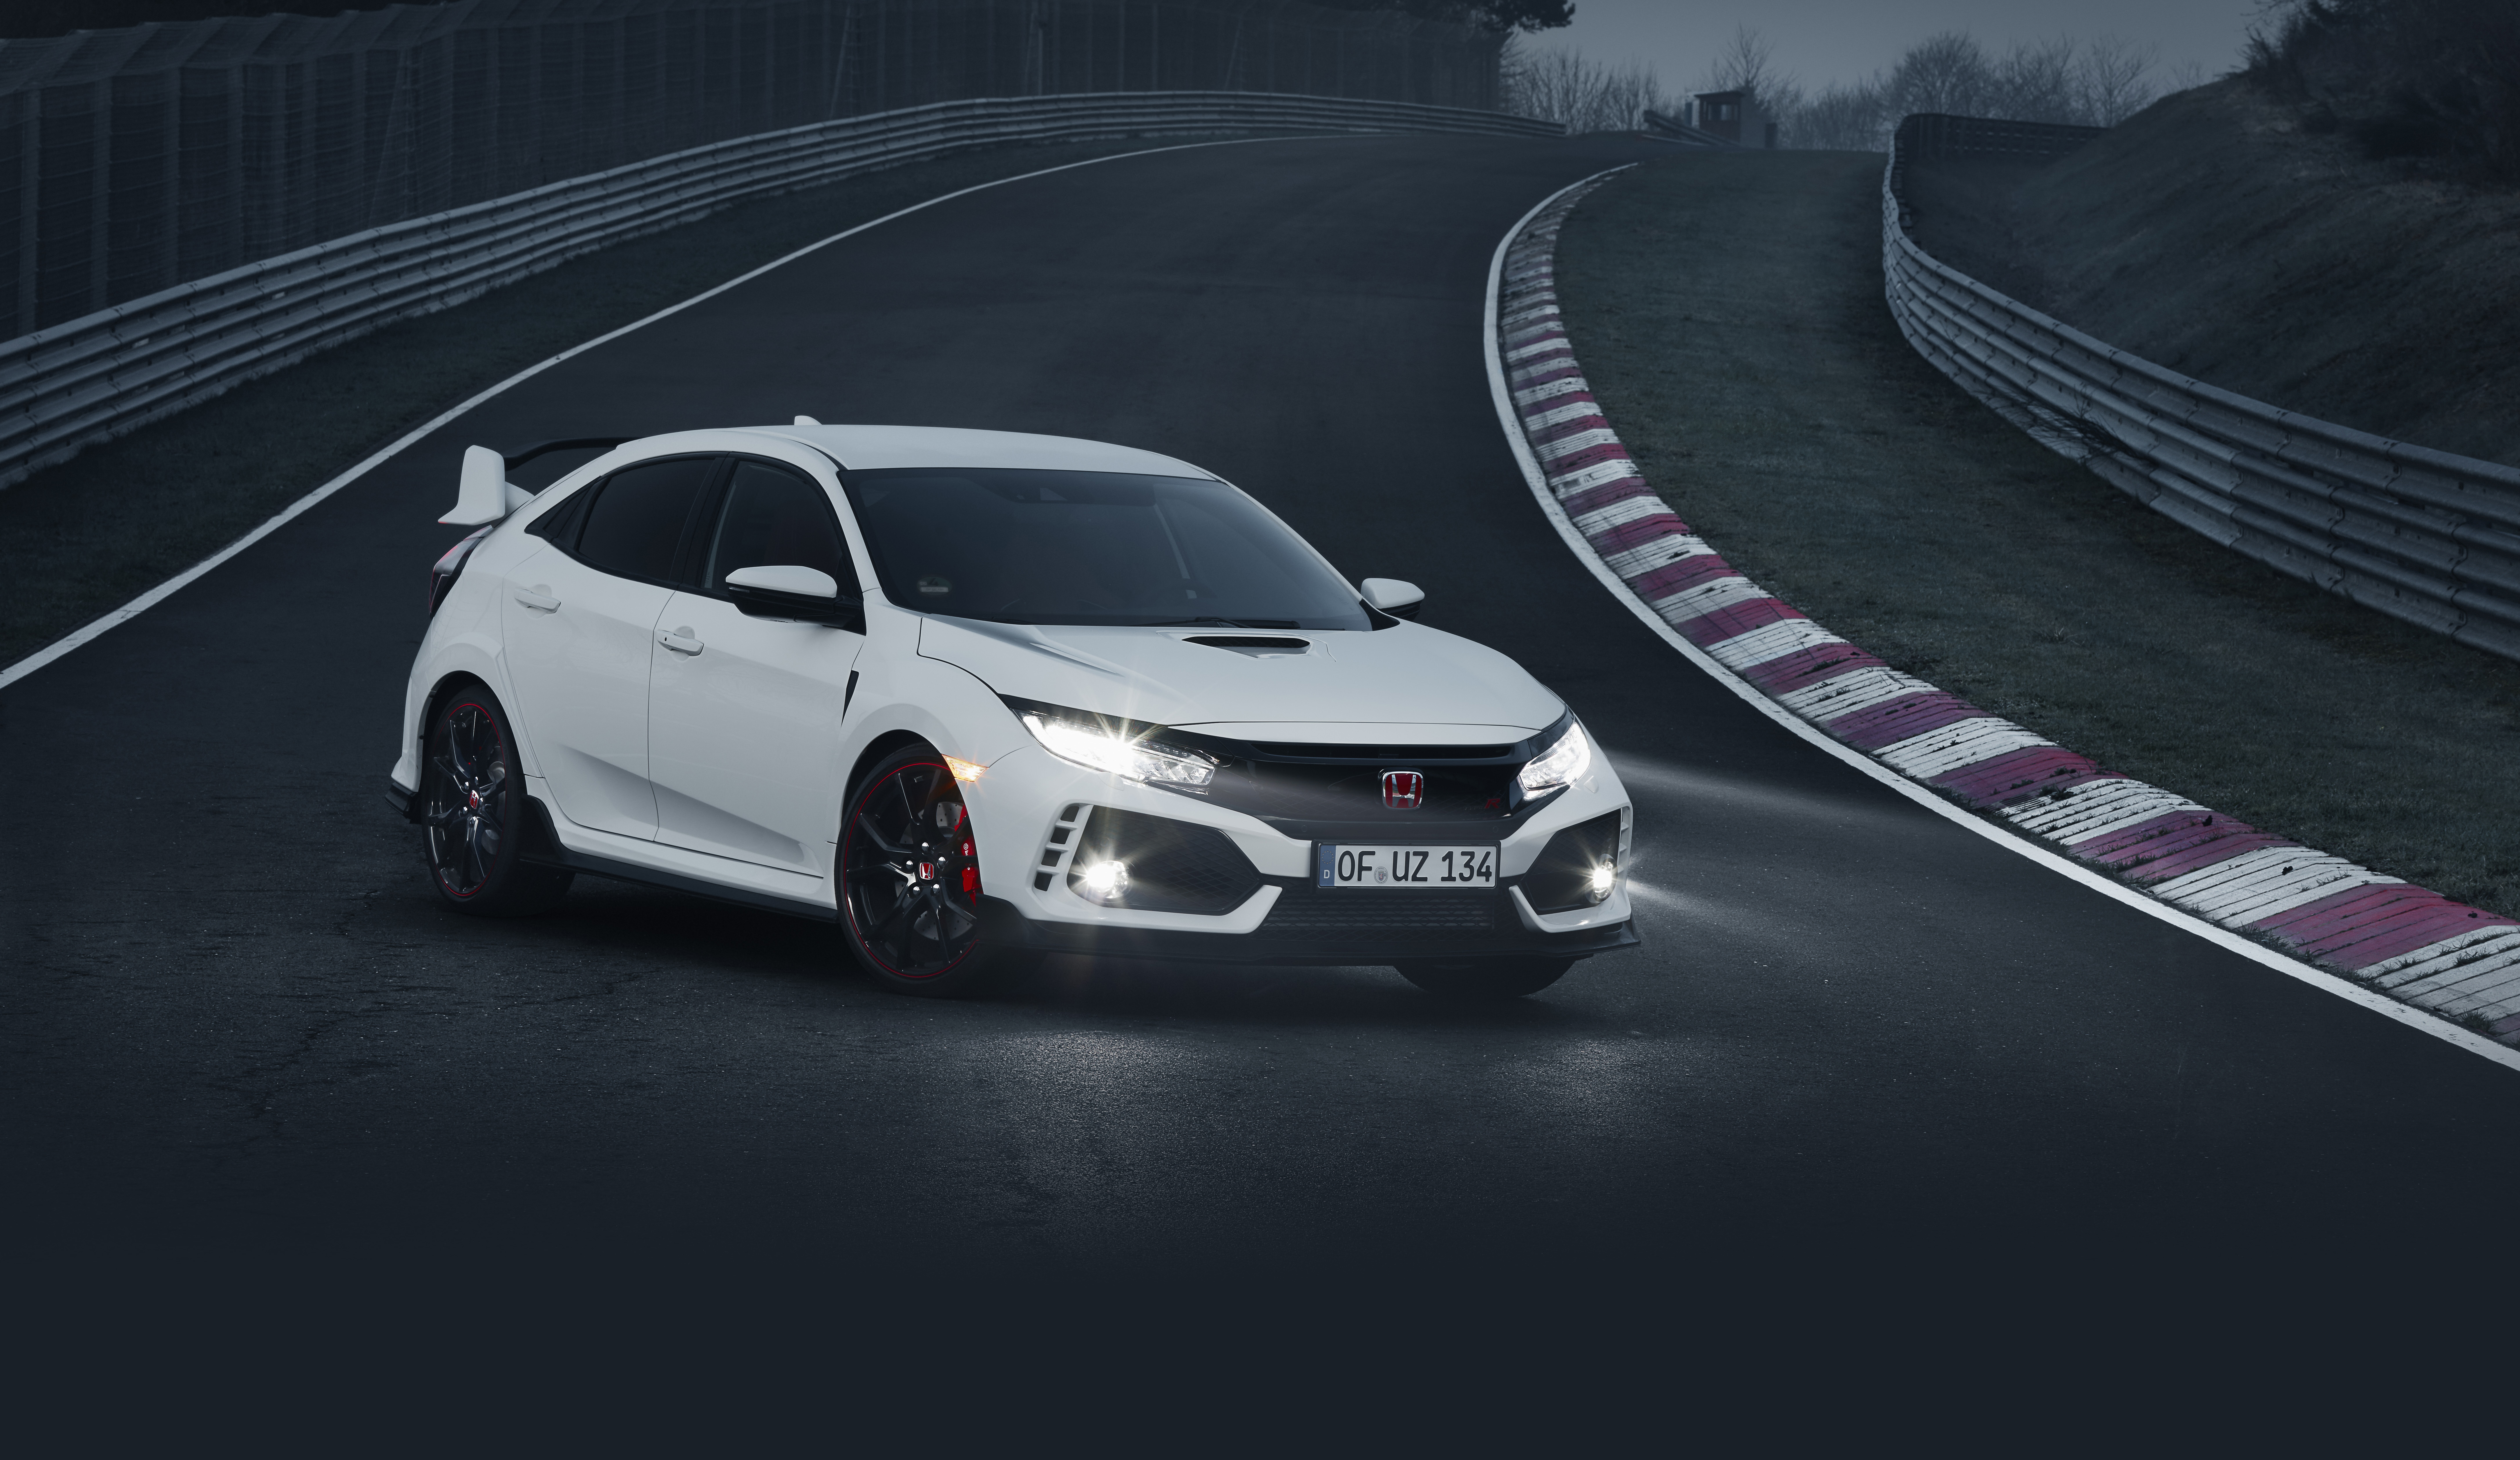 Honda Civic Type R mod specifications